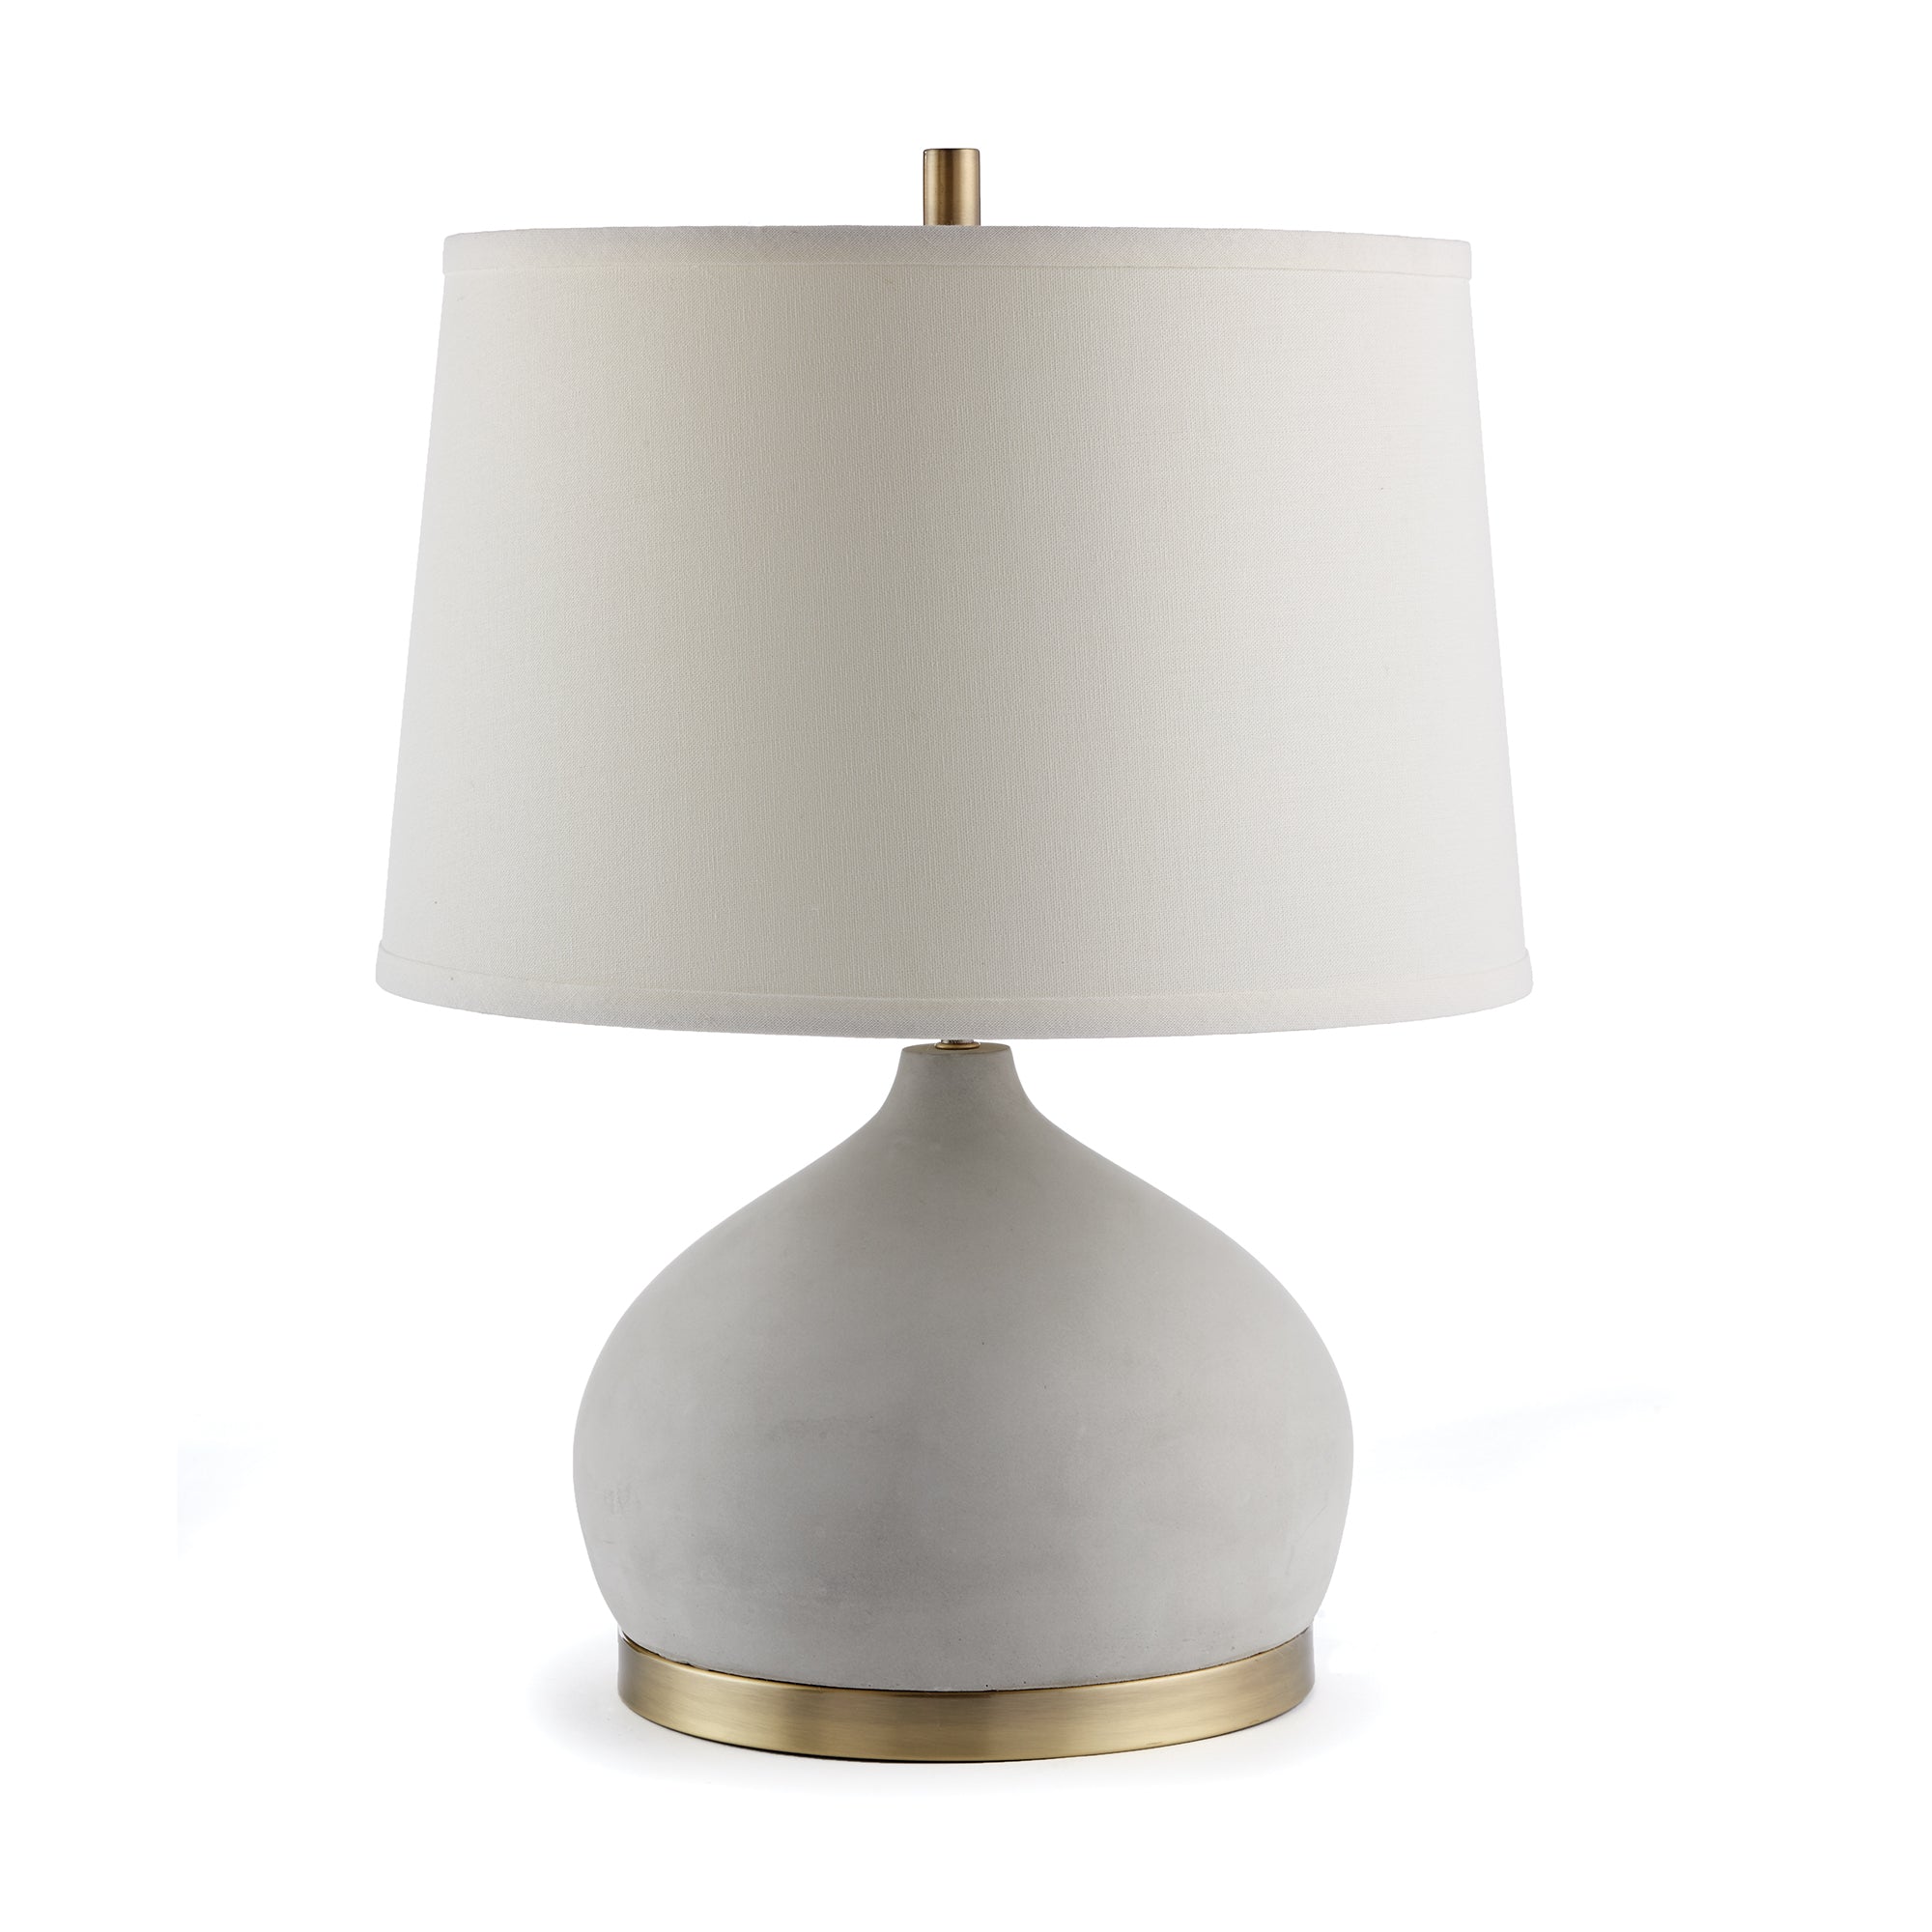 An unexpected mix of cement and brass accents make the Suki lamp a stand out fixture. Extra curvy base and wide shade are details that add style and personality. Amethyst Home provides interior design, new construction, custom furniture, and area rugs in the Miami metro area.